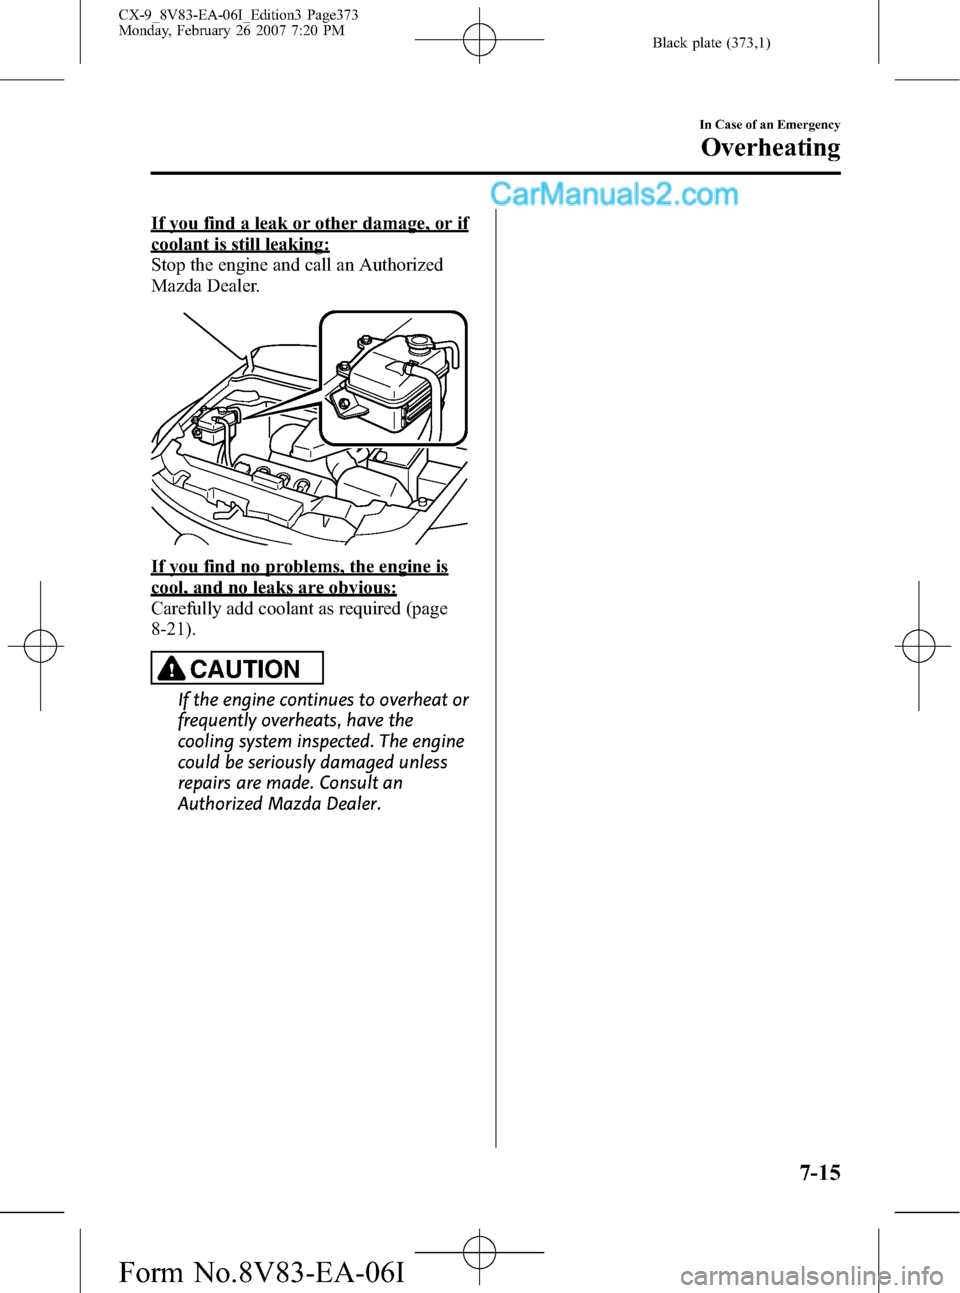 MAZDA MODEL CX-9 2007  Owners Manual (in English) Black plate (373,1)
If you find a leak or other damage, or if
coolant is still leaking:
Stop the engine and call an Authorized
Mazda Dealer.
If you find no problems, the engine is
cool, and no leaks a